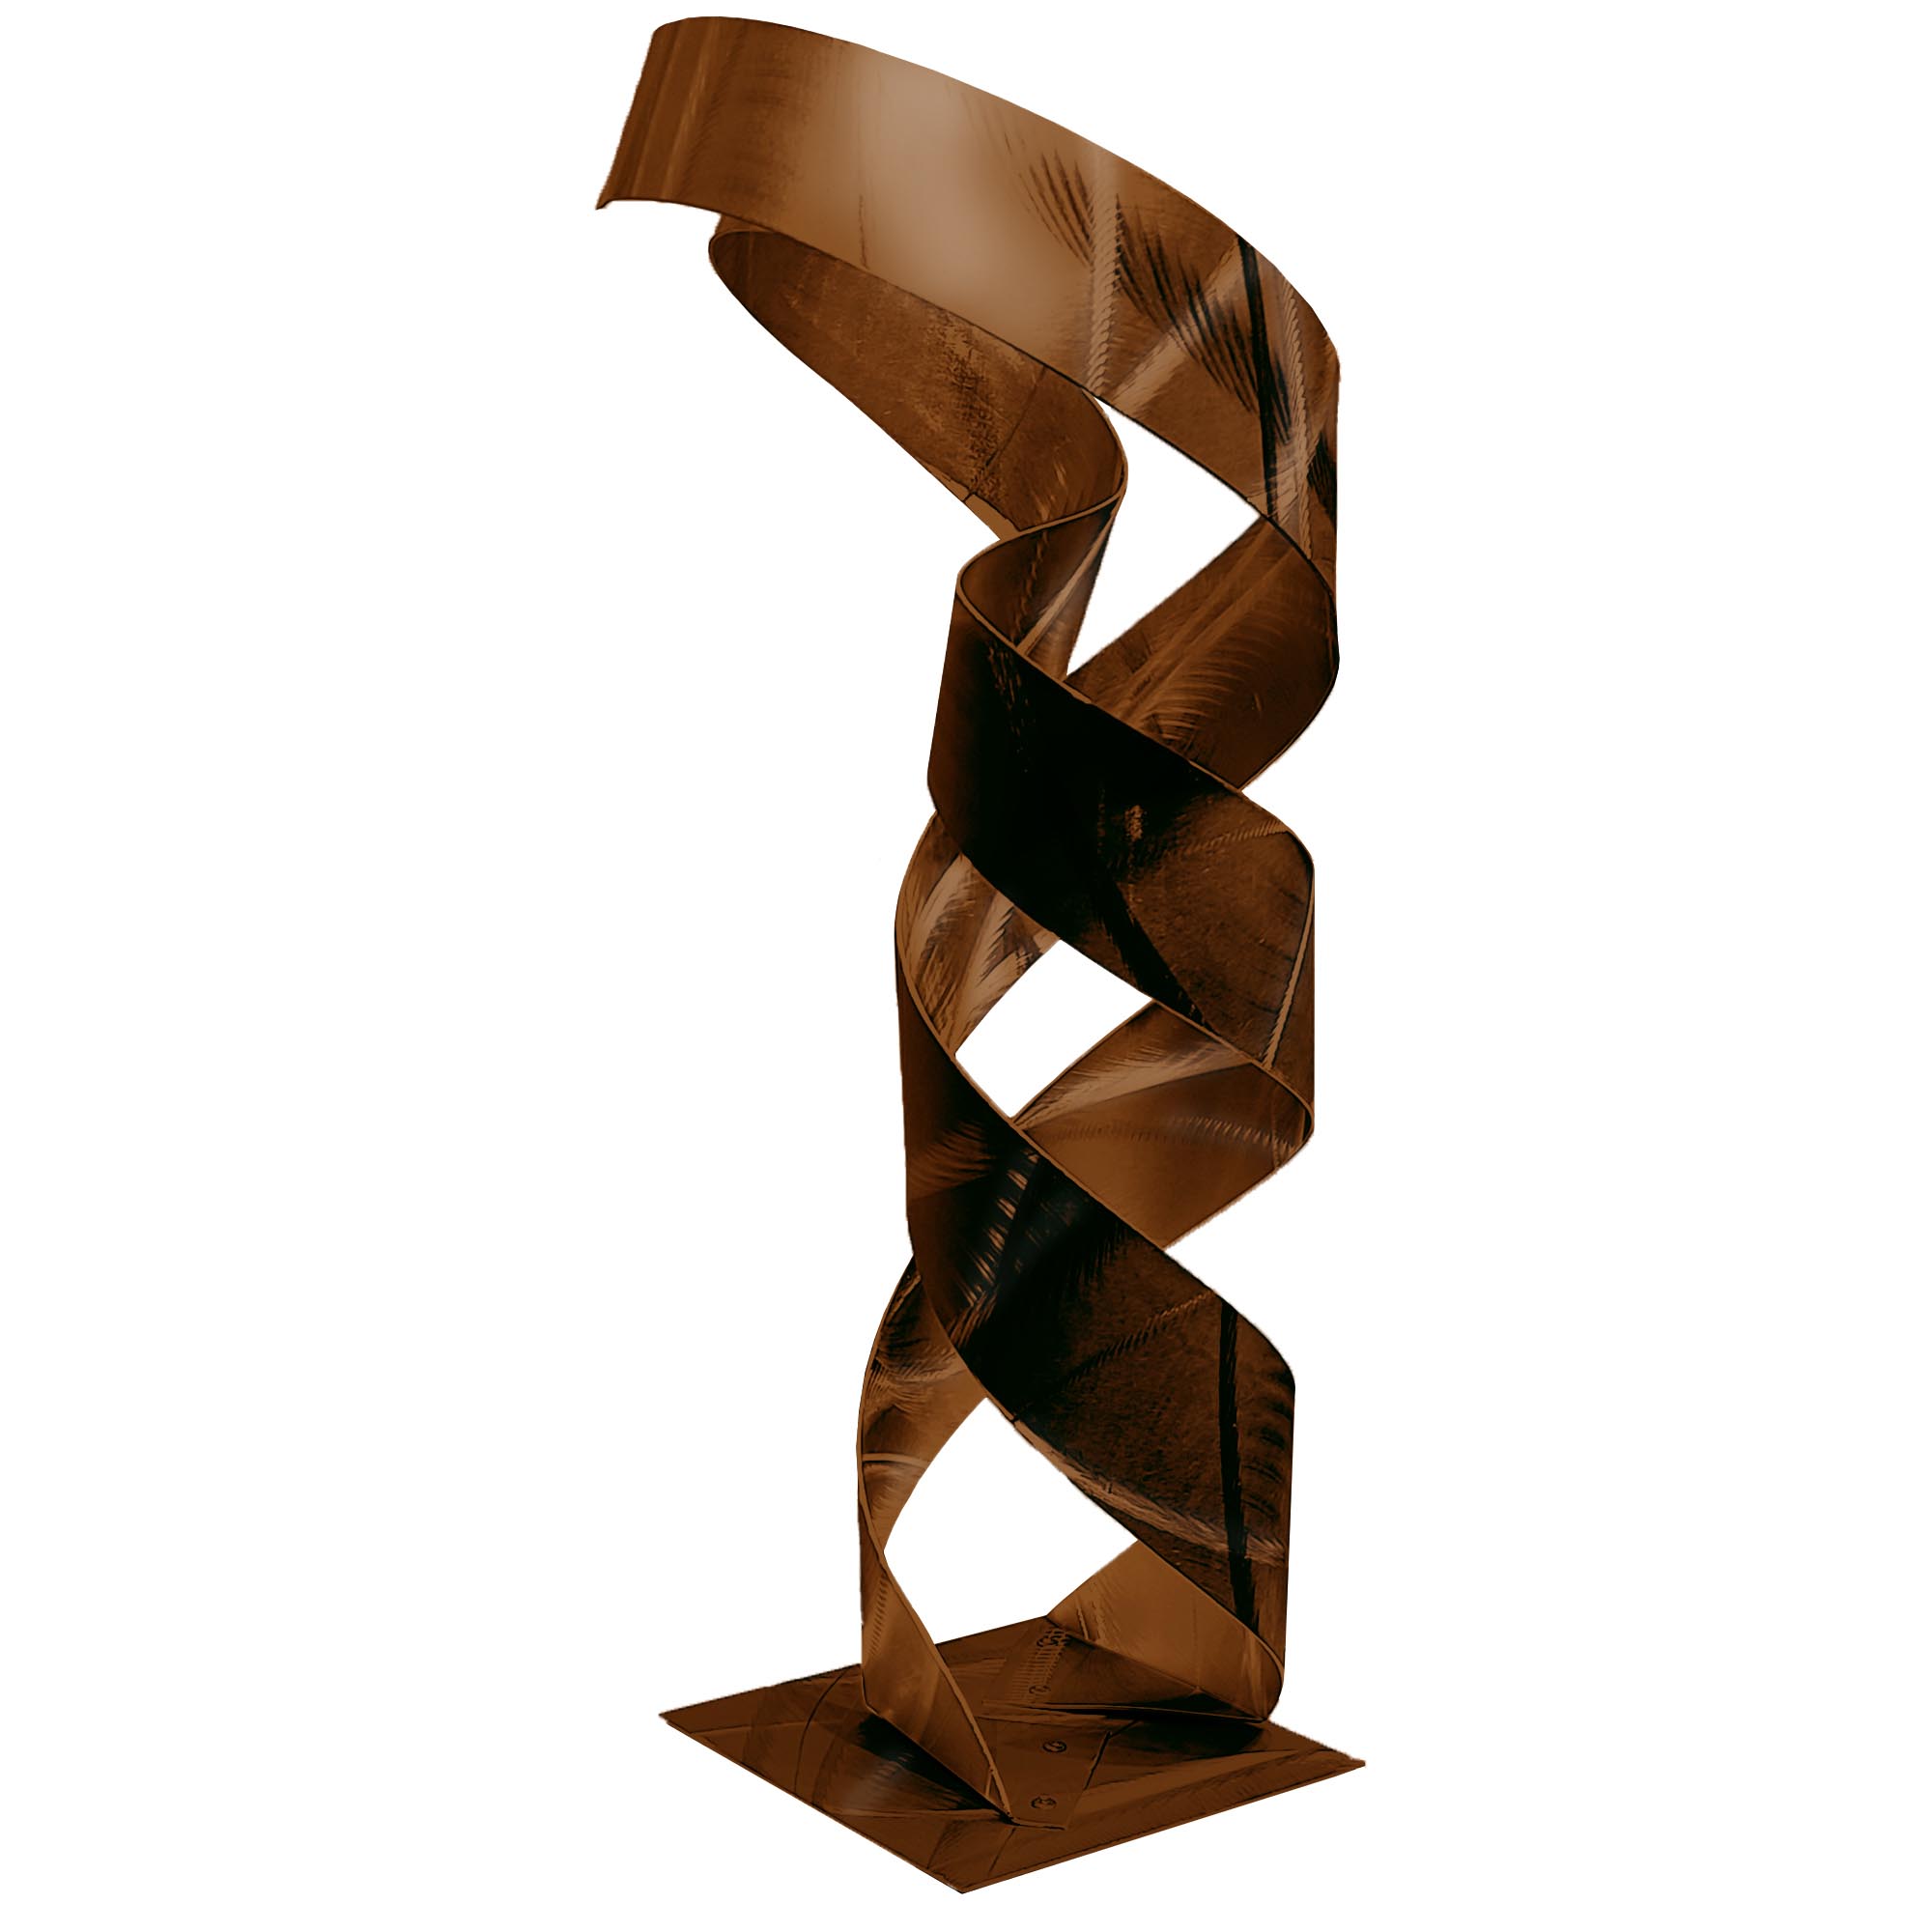 Continuum in Brown by Carlos Jacobs - Metal Sculpture, Modern Decor (10x25in.) - Image 2